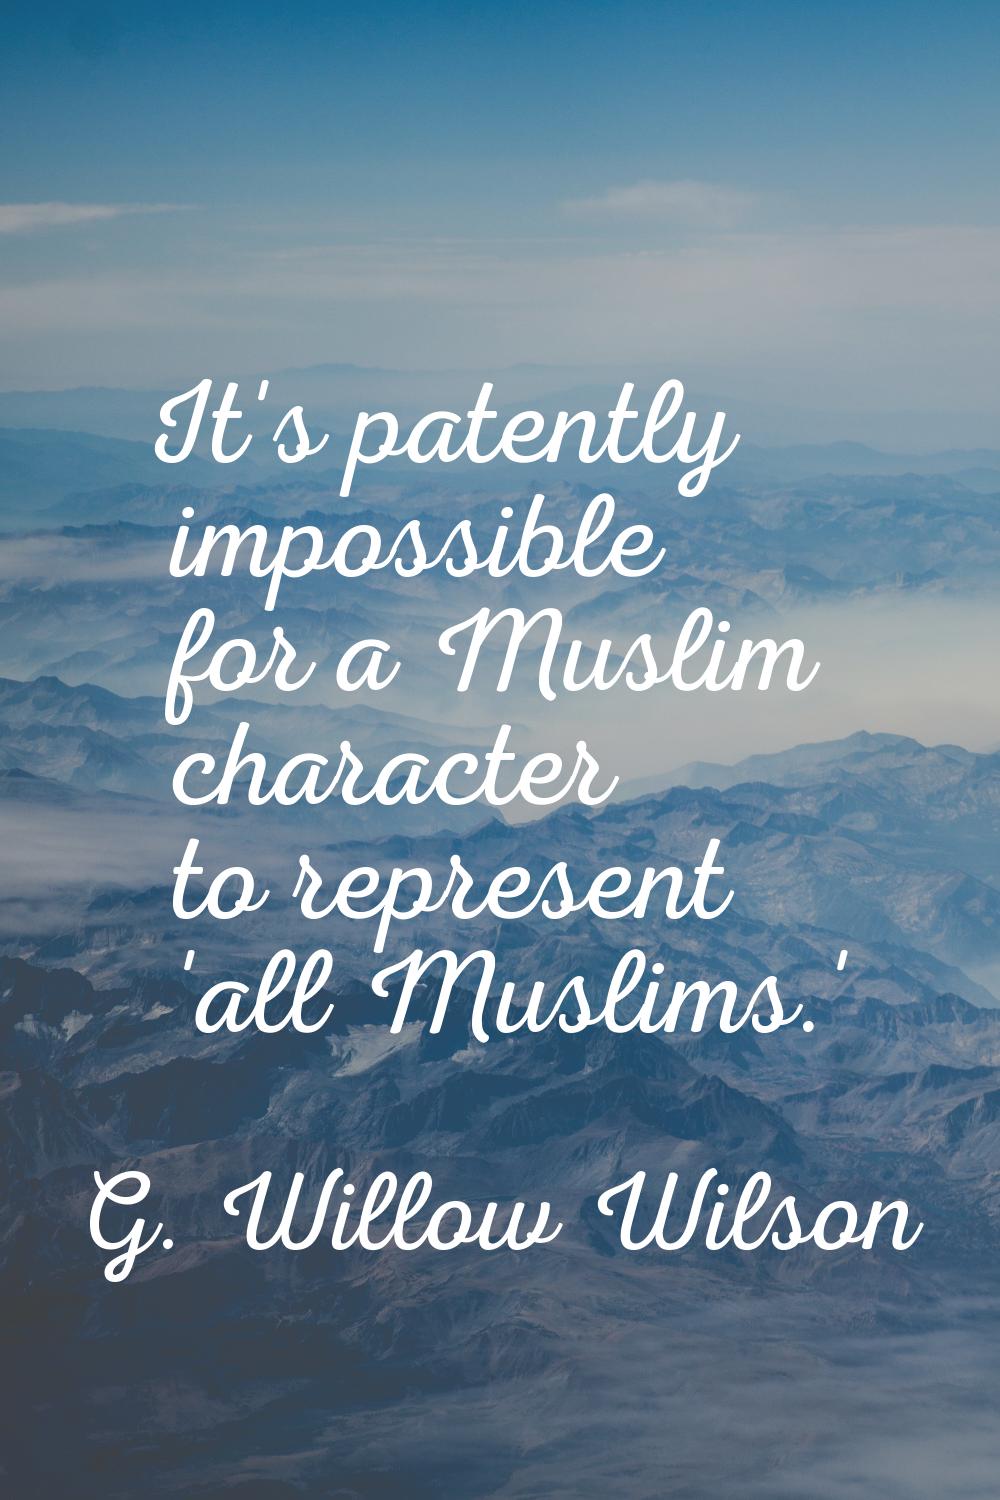 It's patently impossible for a Muslim character to represent 'all Muslims.'